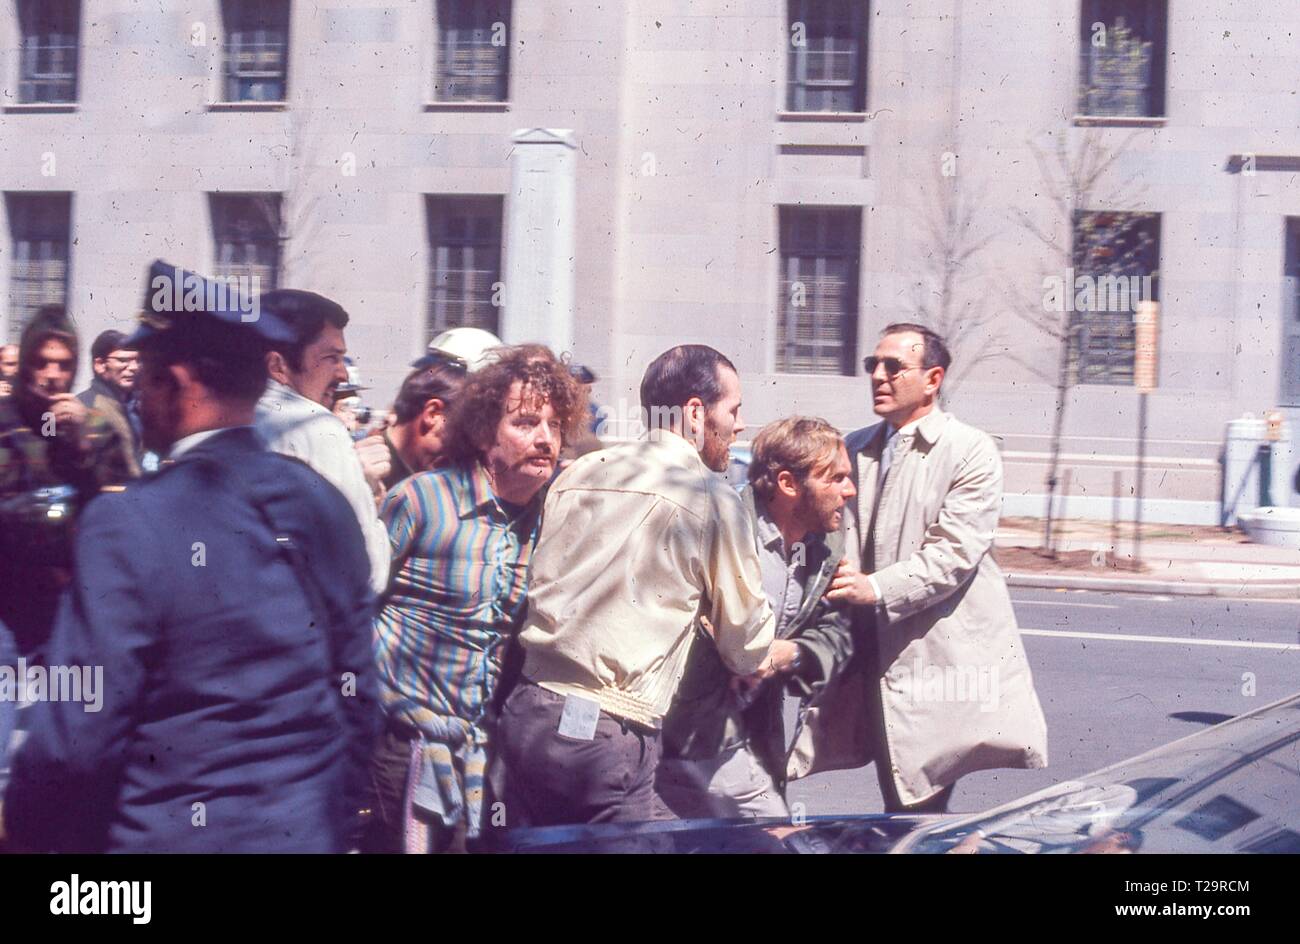 During the May Day protests against the Vietnam War in Washington, DC a protester lunges forward as he is retrained by two men in plain clothing, possibly plain-clothes law enforcement, 1971. () Stock Photo